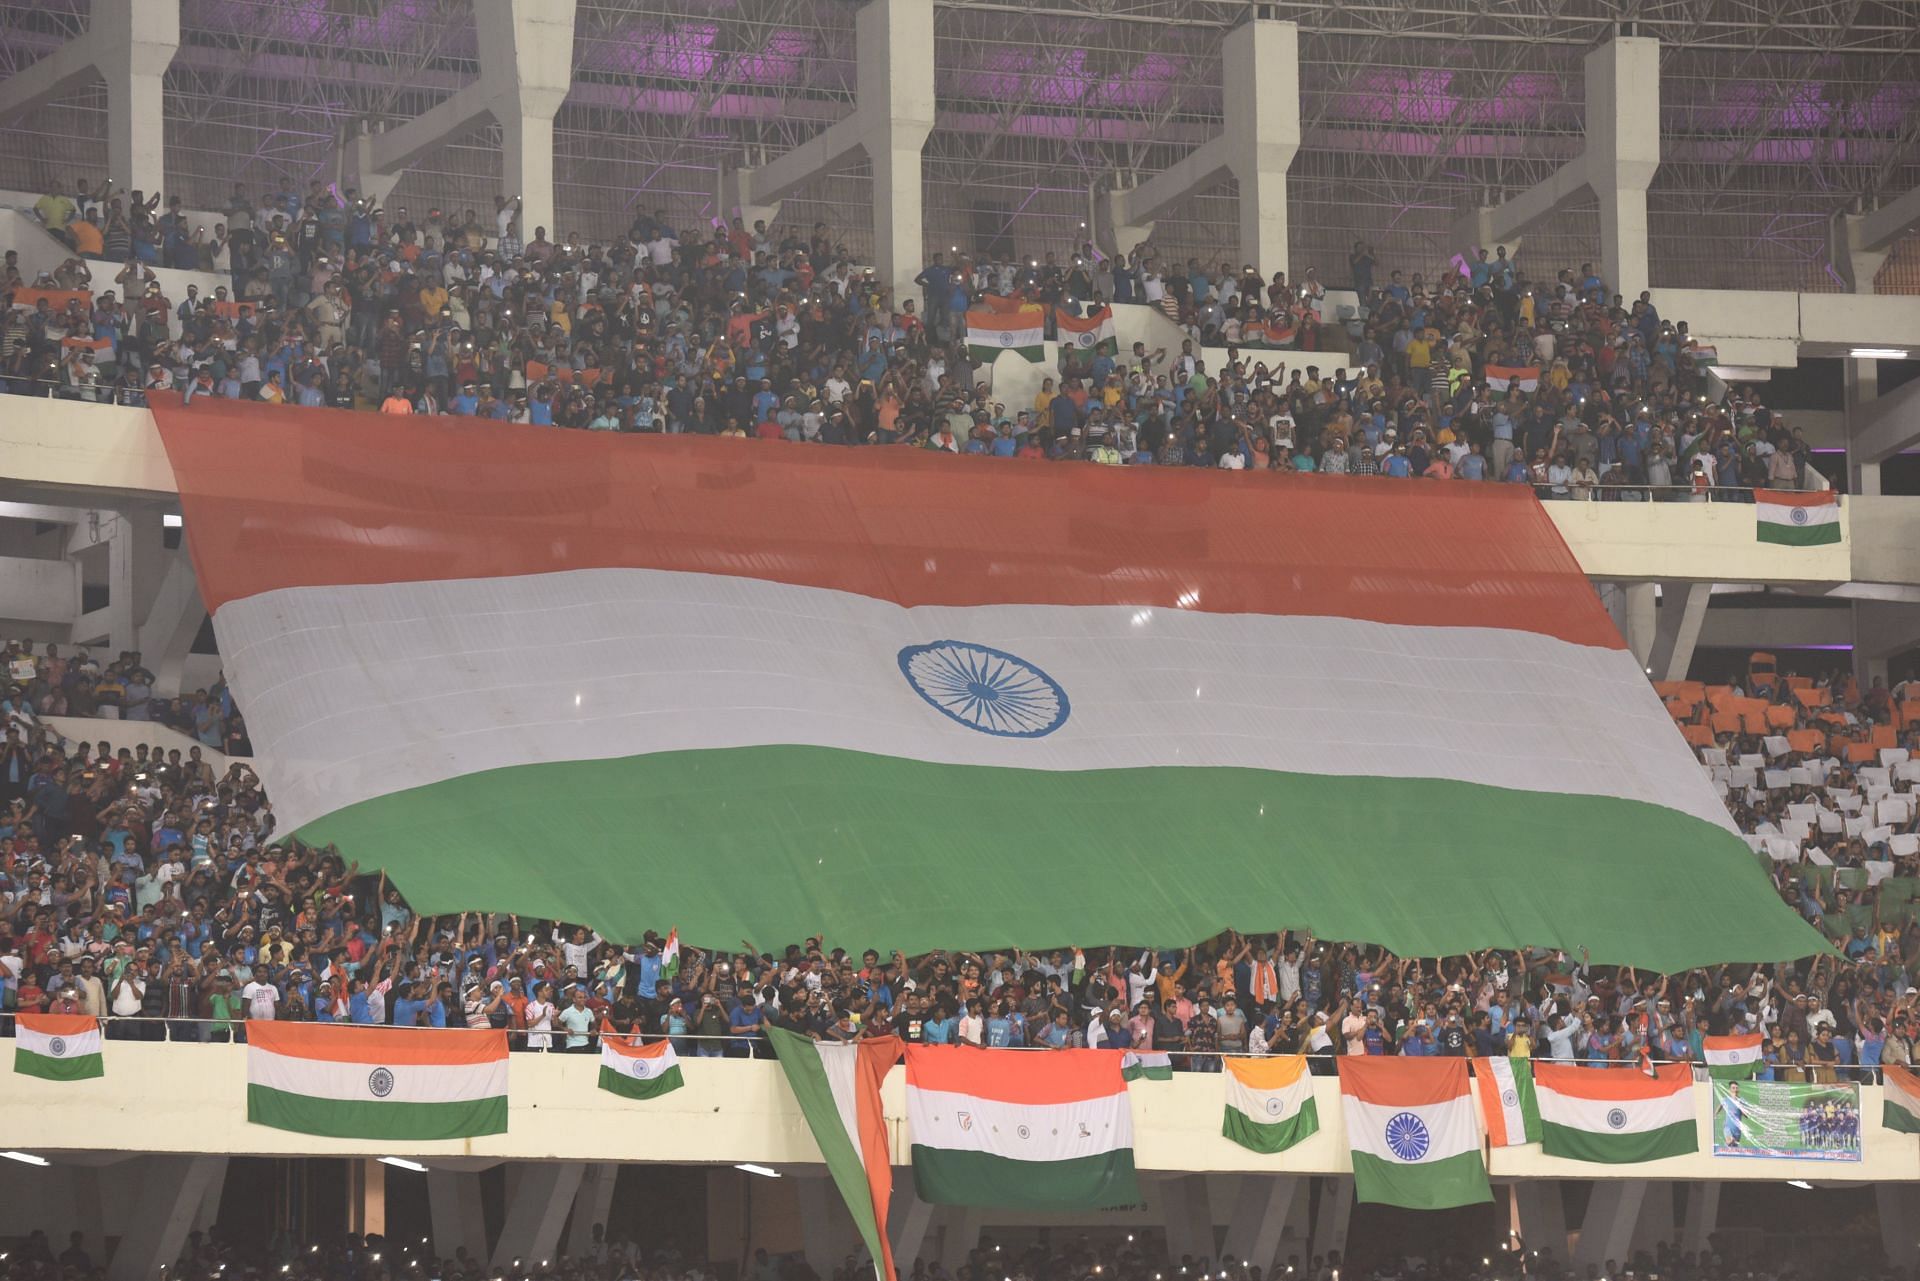 India were set to face Belarus on March 26 in an international friendly. (Image Courtesy: Twitter/IndianFootball)